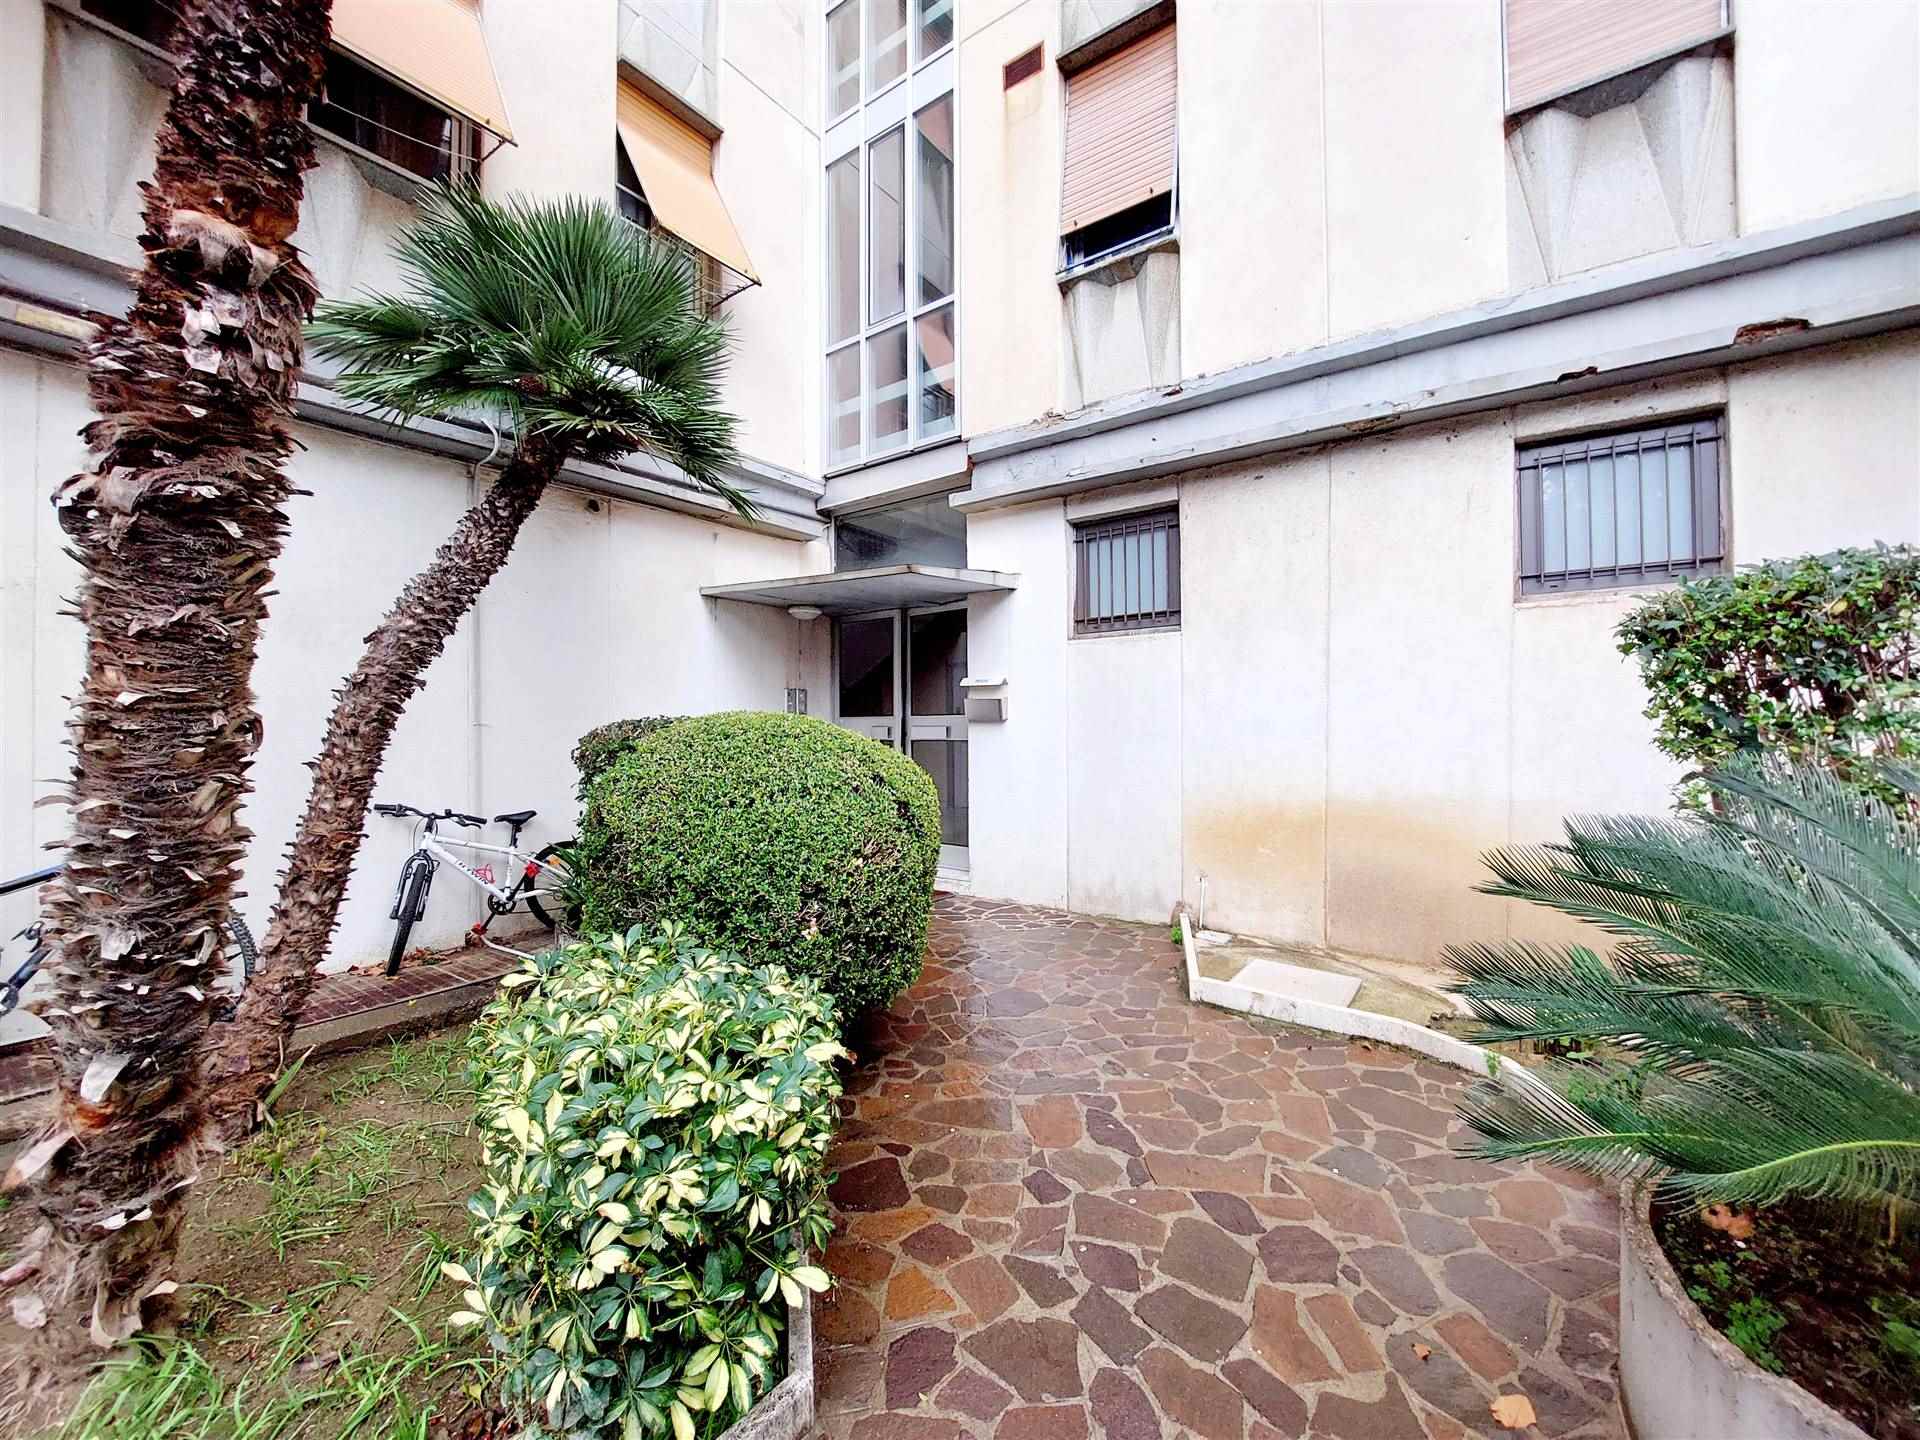 CENTRO, CIVITAVECCHIA, Apartment for sale of 90 Sq. mt., Habitable, Heating Centralized, Energetic class: G, Epi: 175 kwh/m2 year, placed at 3°, 